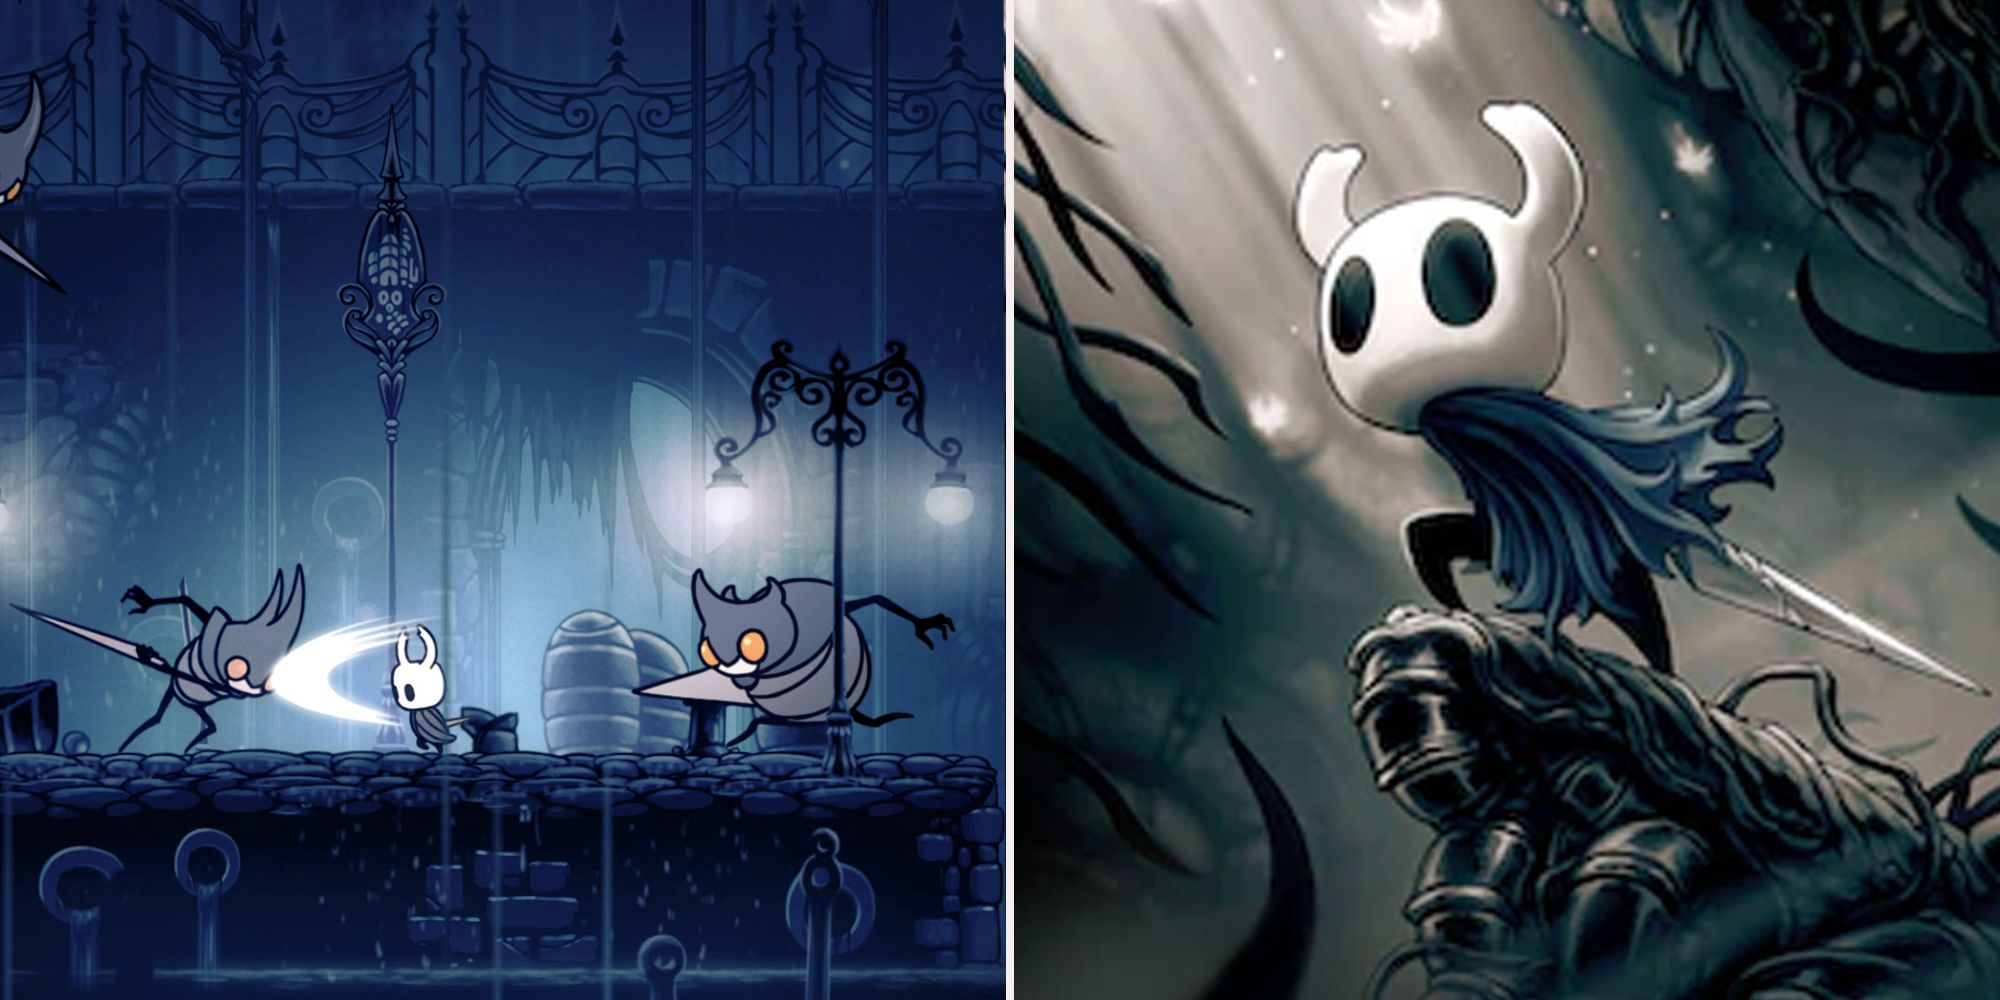 Split image of Hollow Knight gameplay and cover